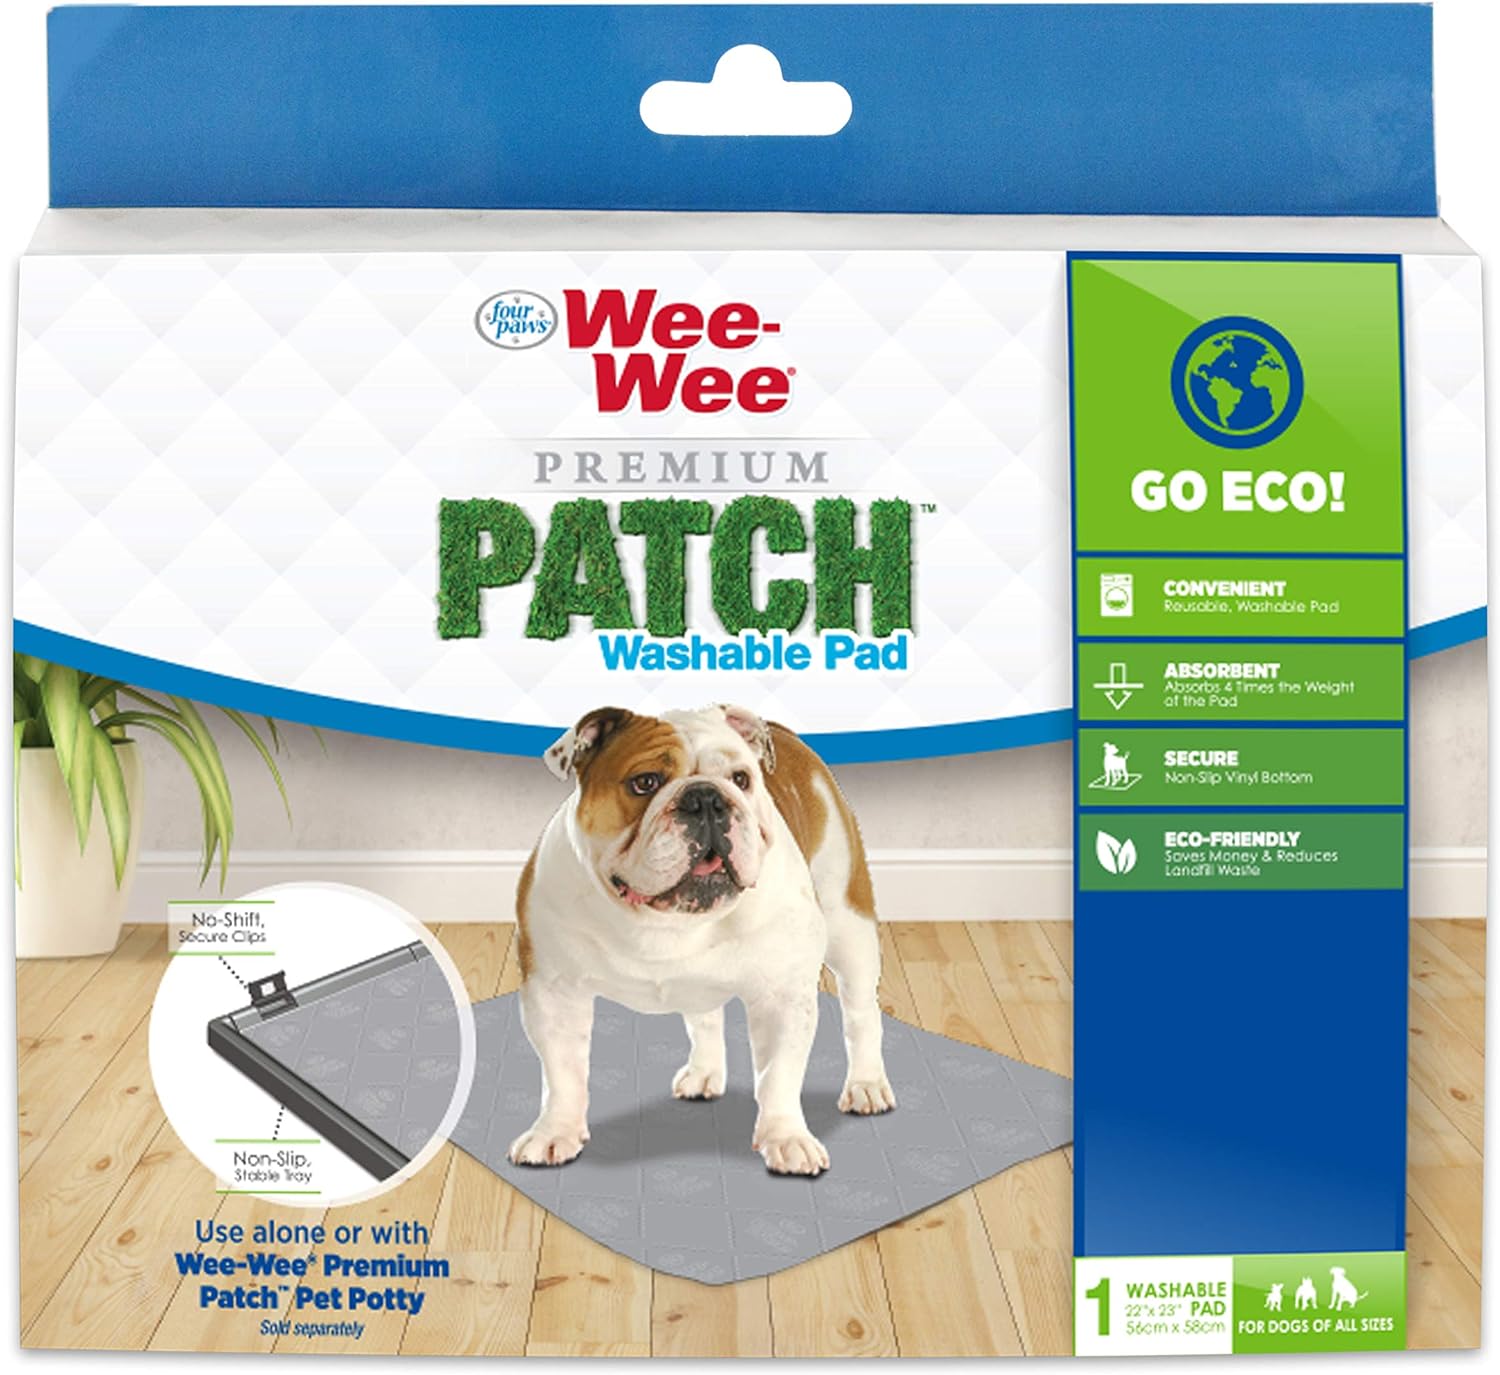 Four Paws Wee-Wee Premium Patch Reusable Pee Pad